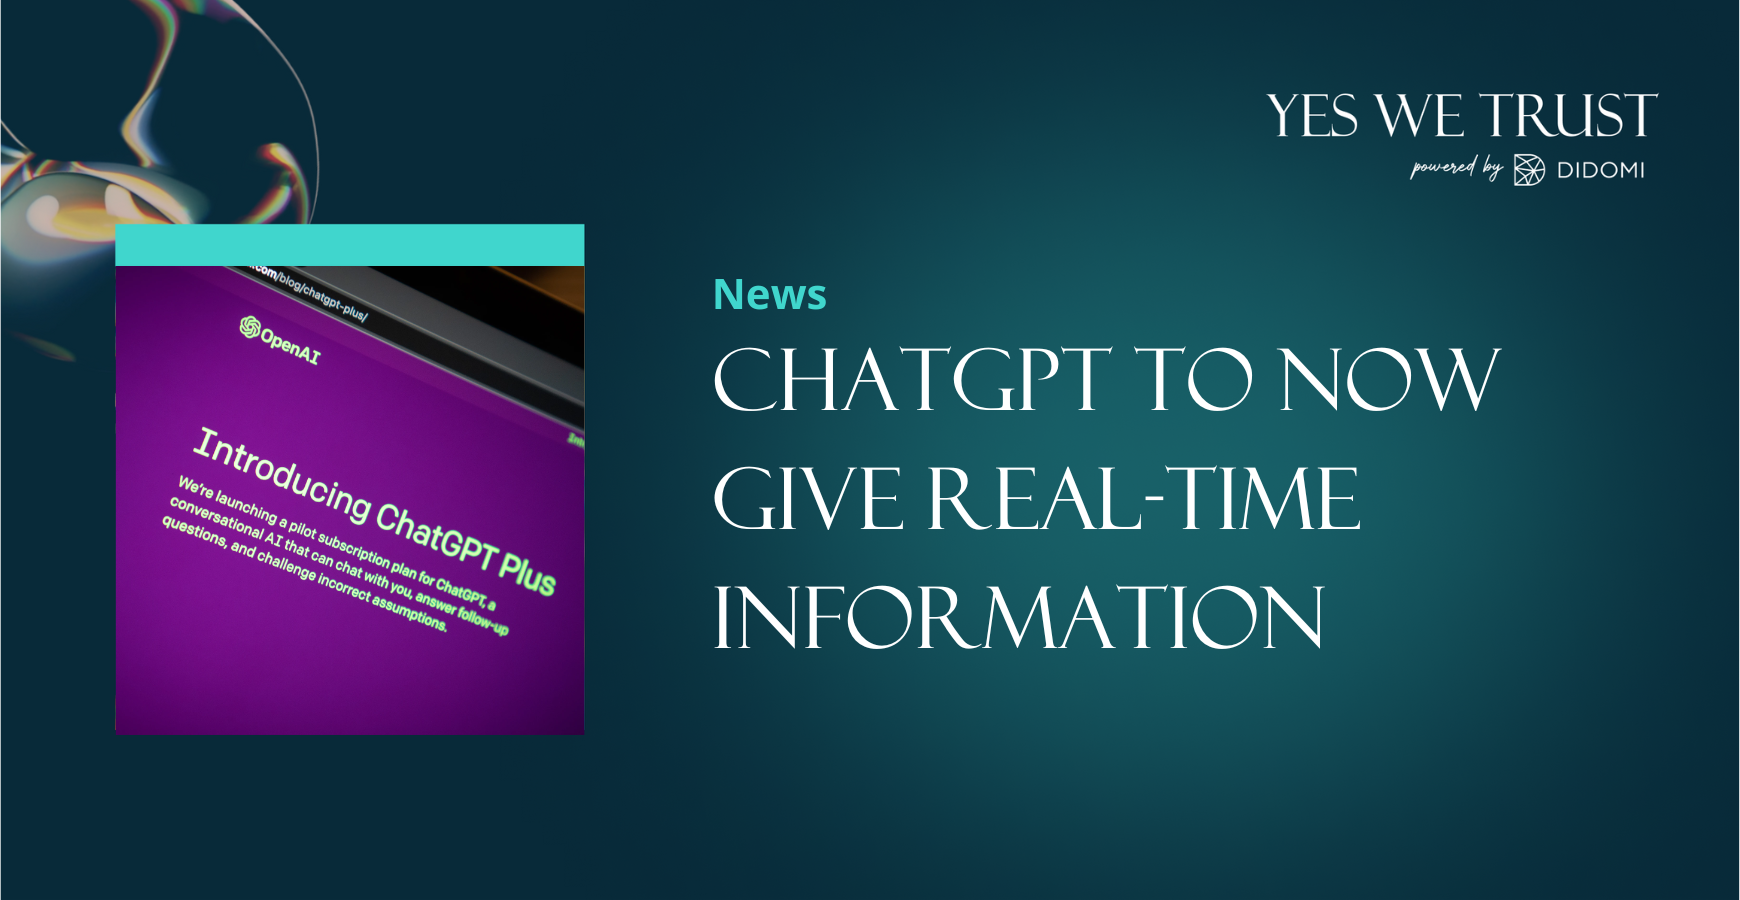 ChatGPT to now give real-time information